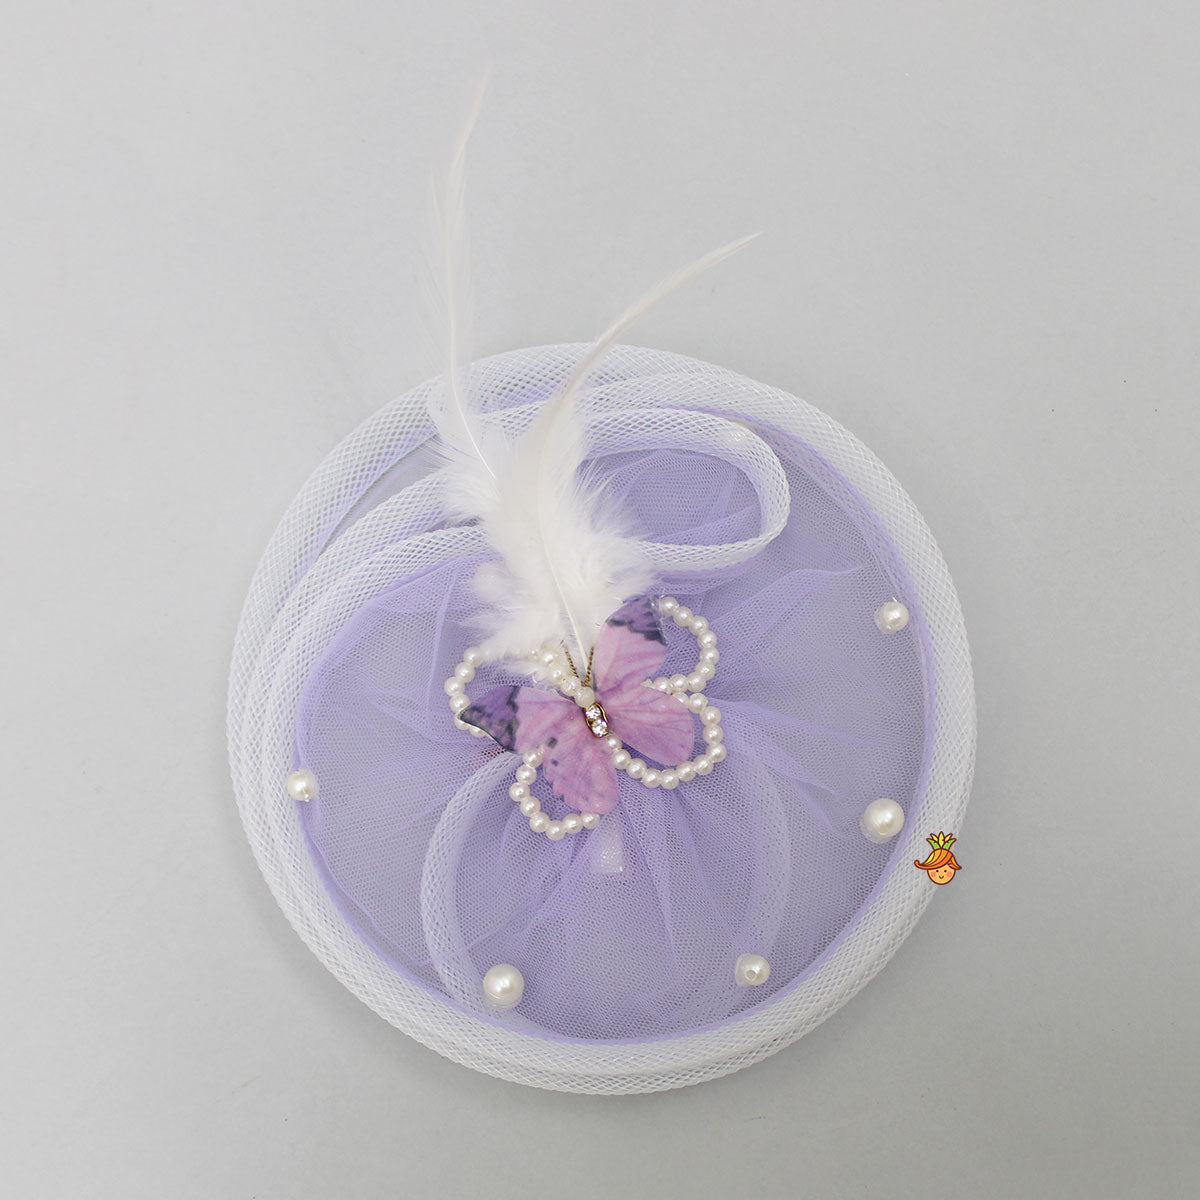 Fancy Twisted Lavender Butterfly Hair Clip